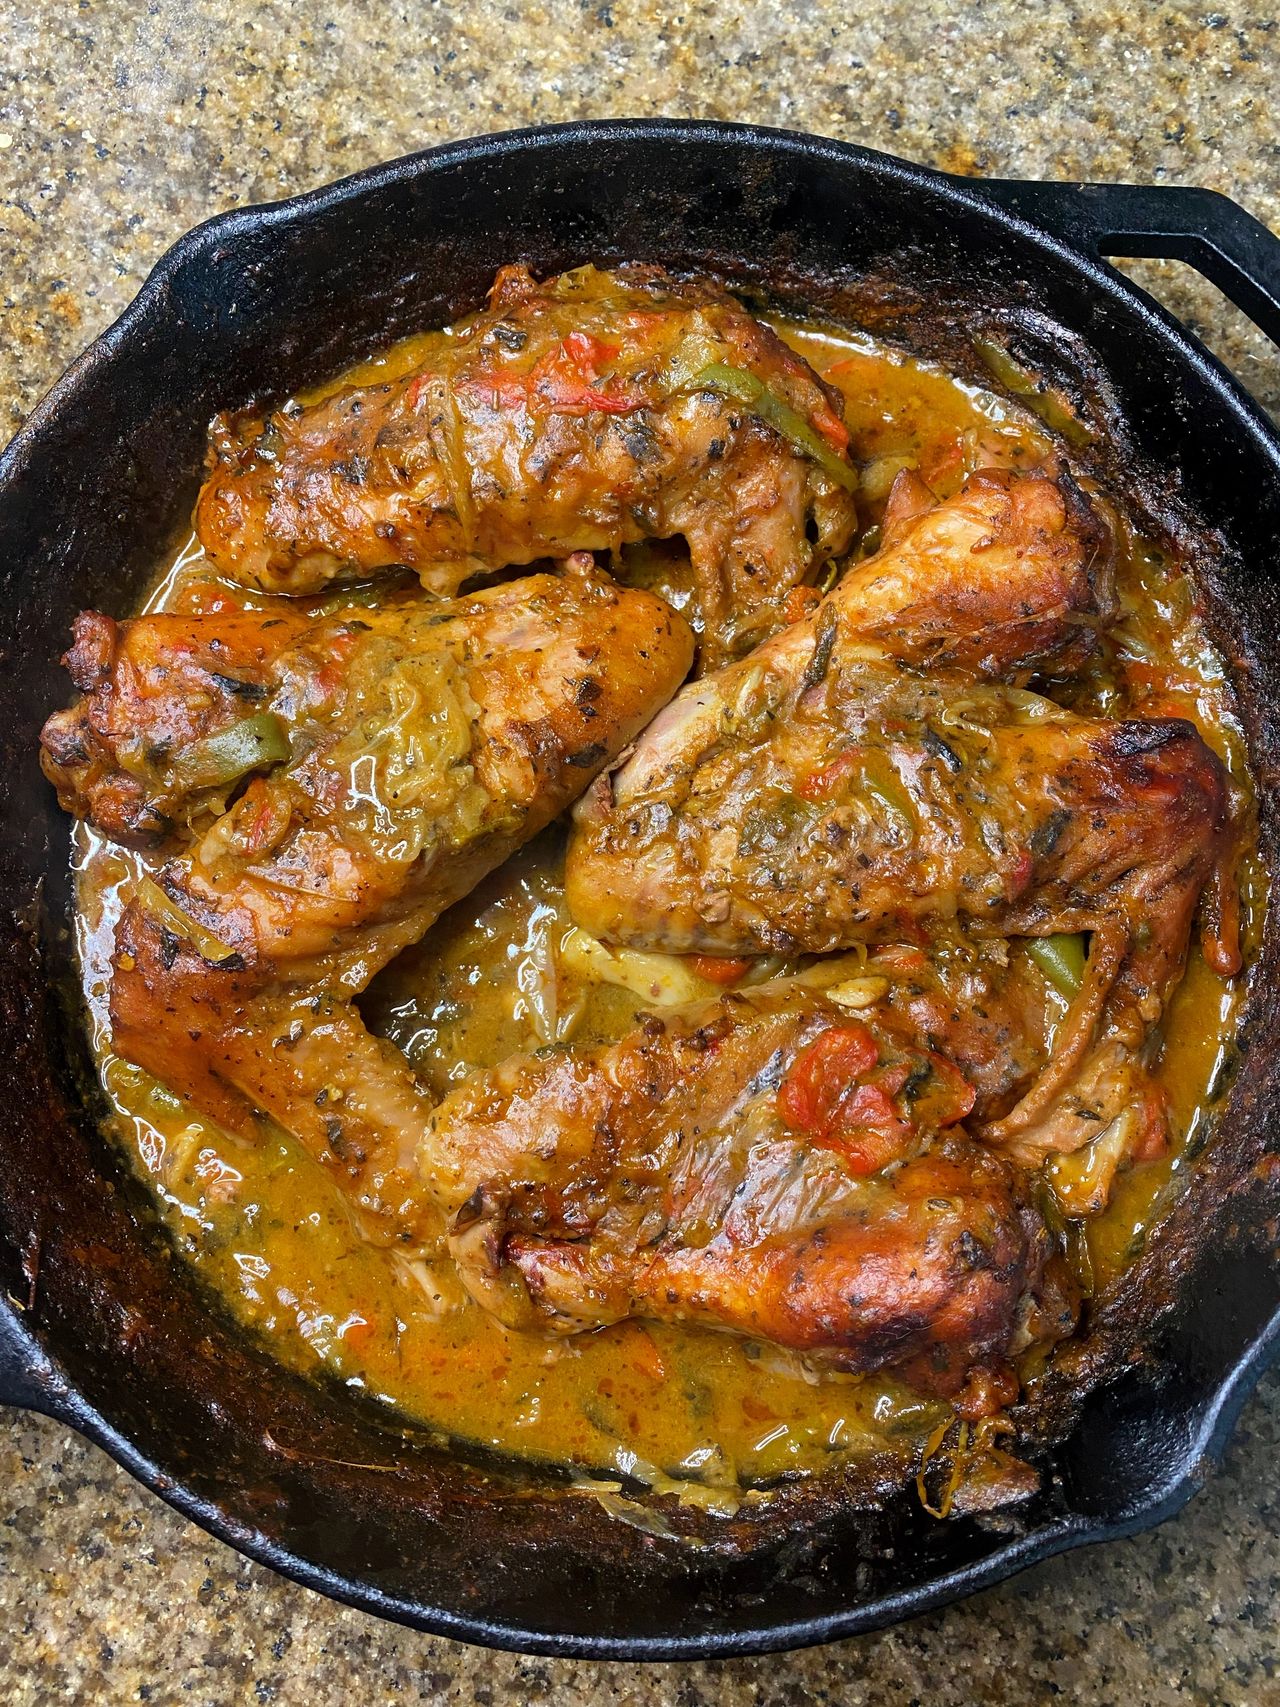 One Pan Smothered Turkey Wings